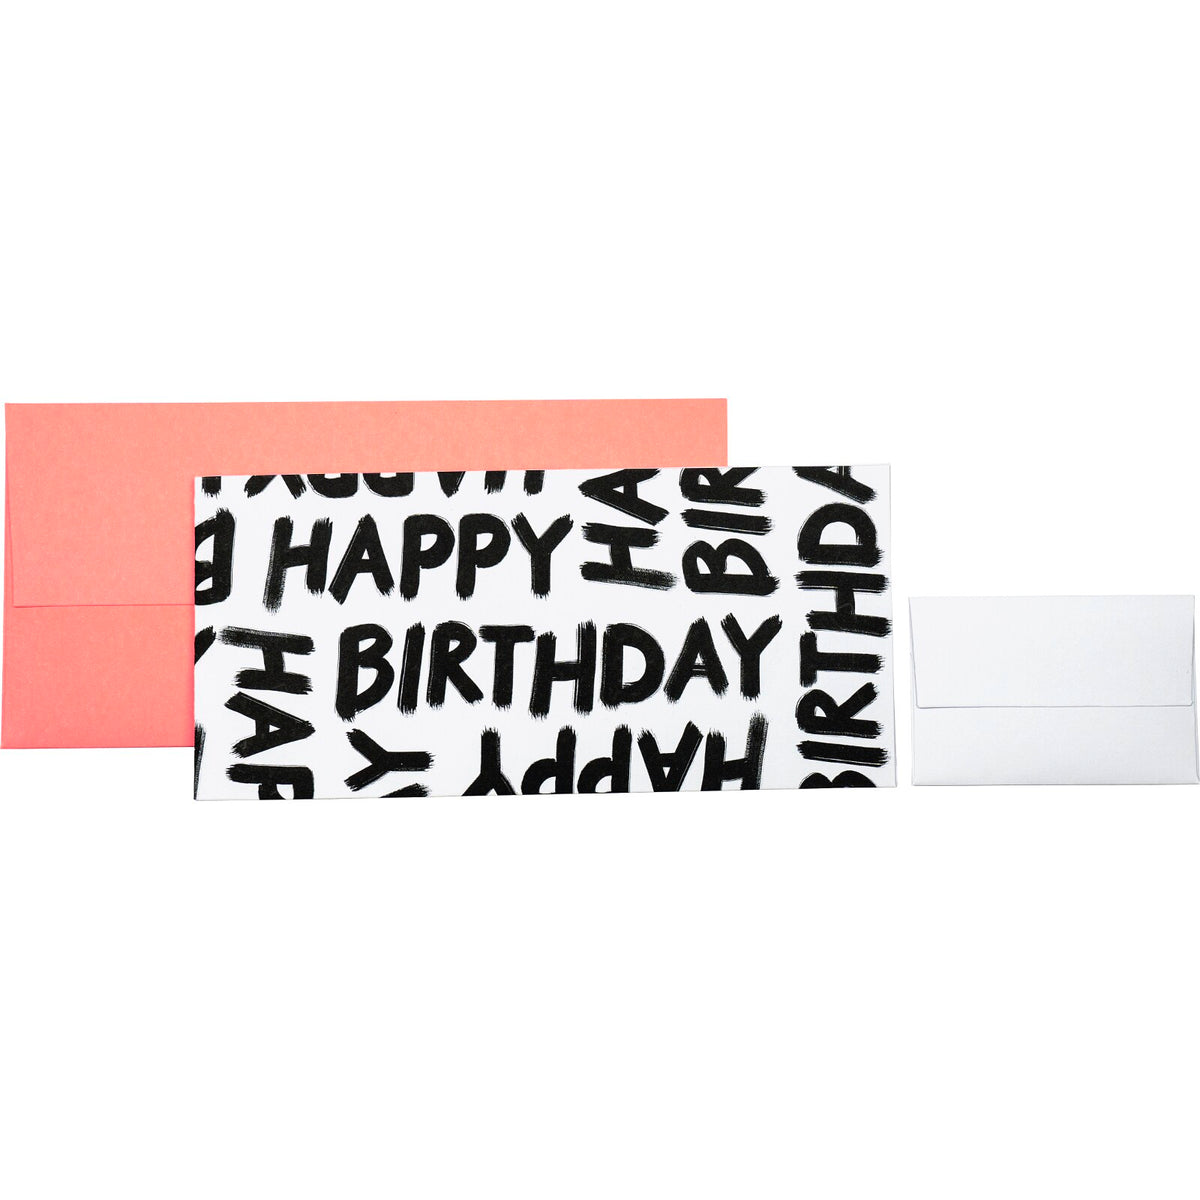 Forby Birthday Graffiti Gift Voucher Wallet by penny black